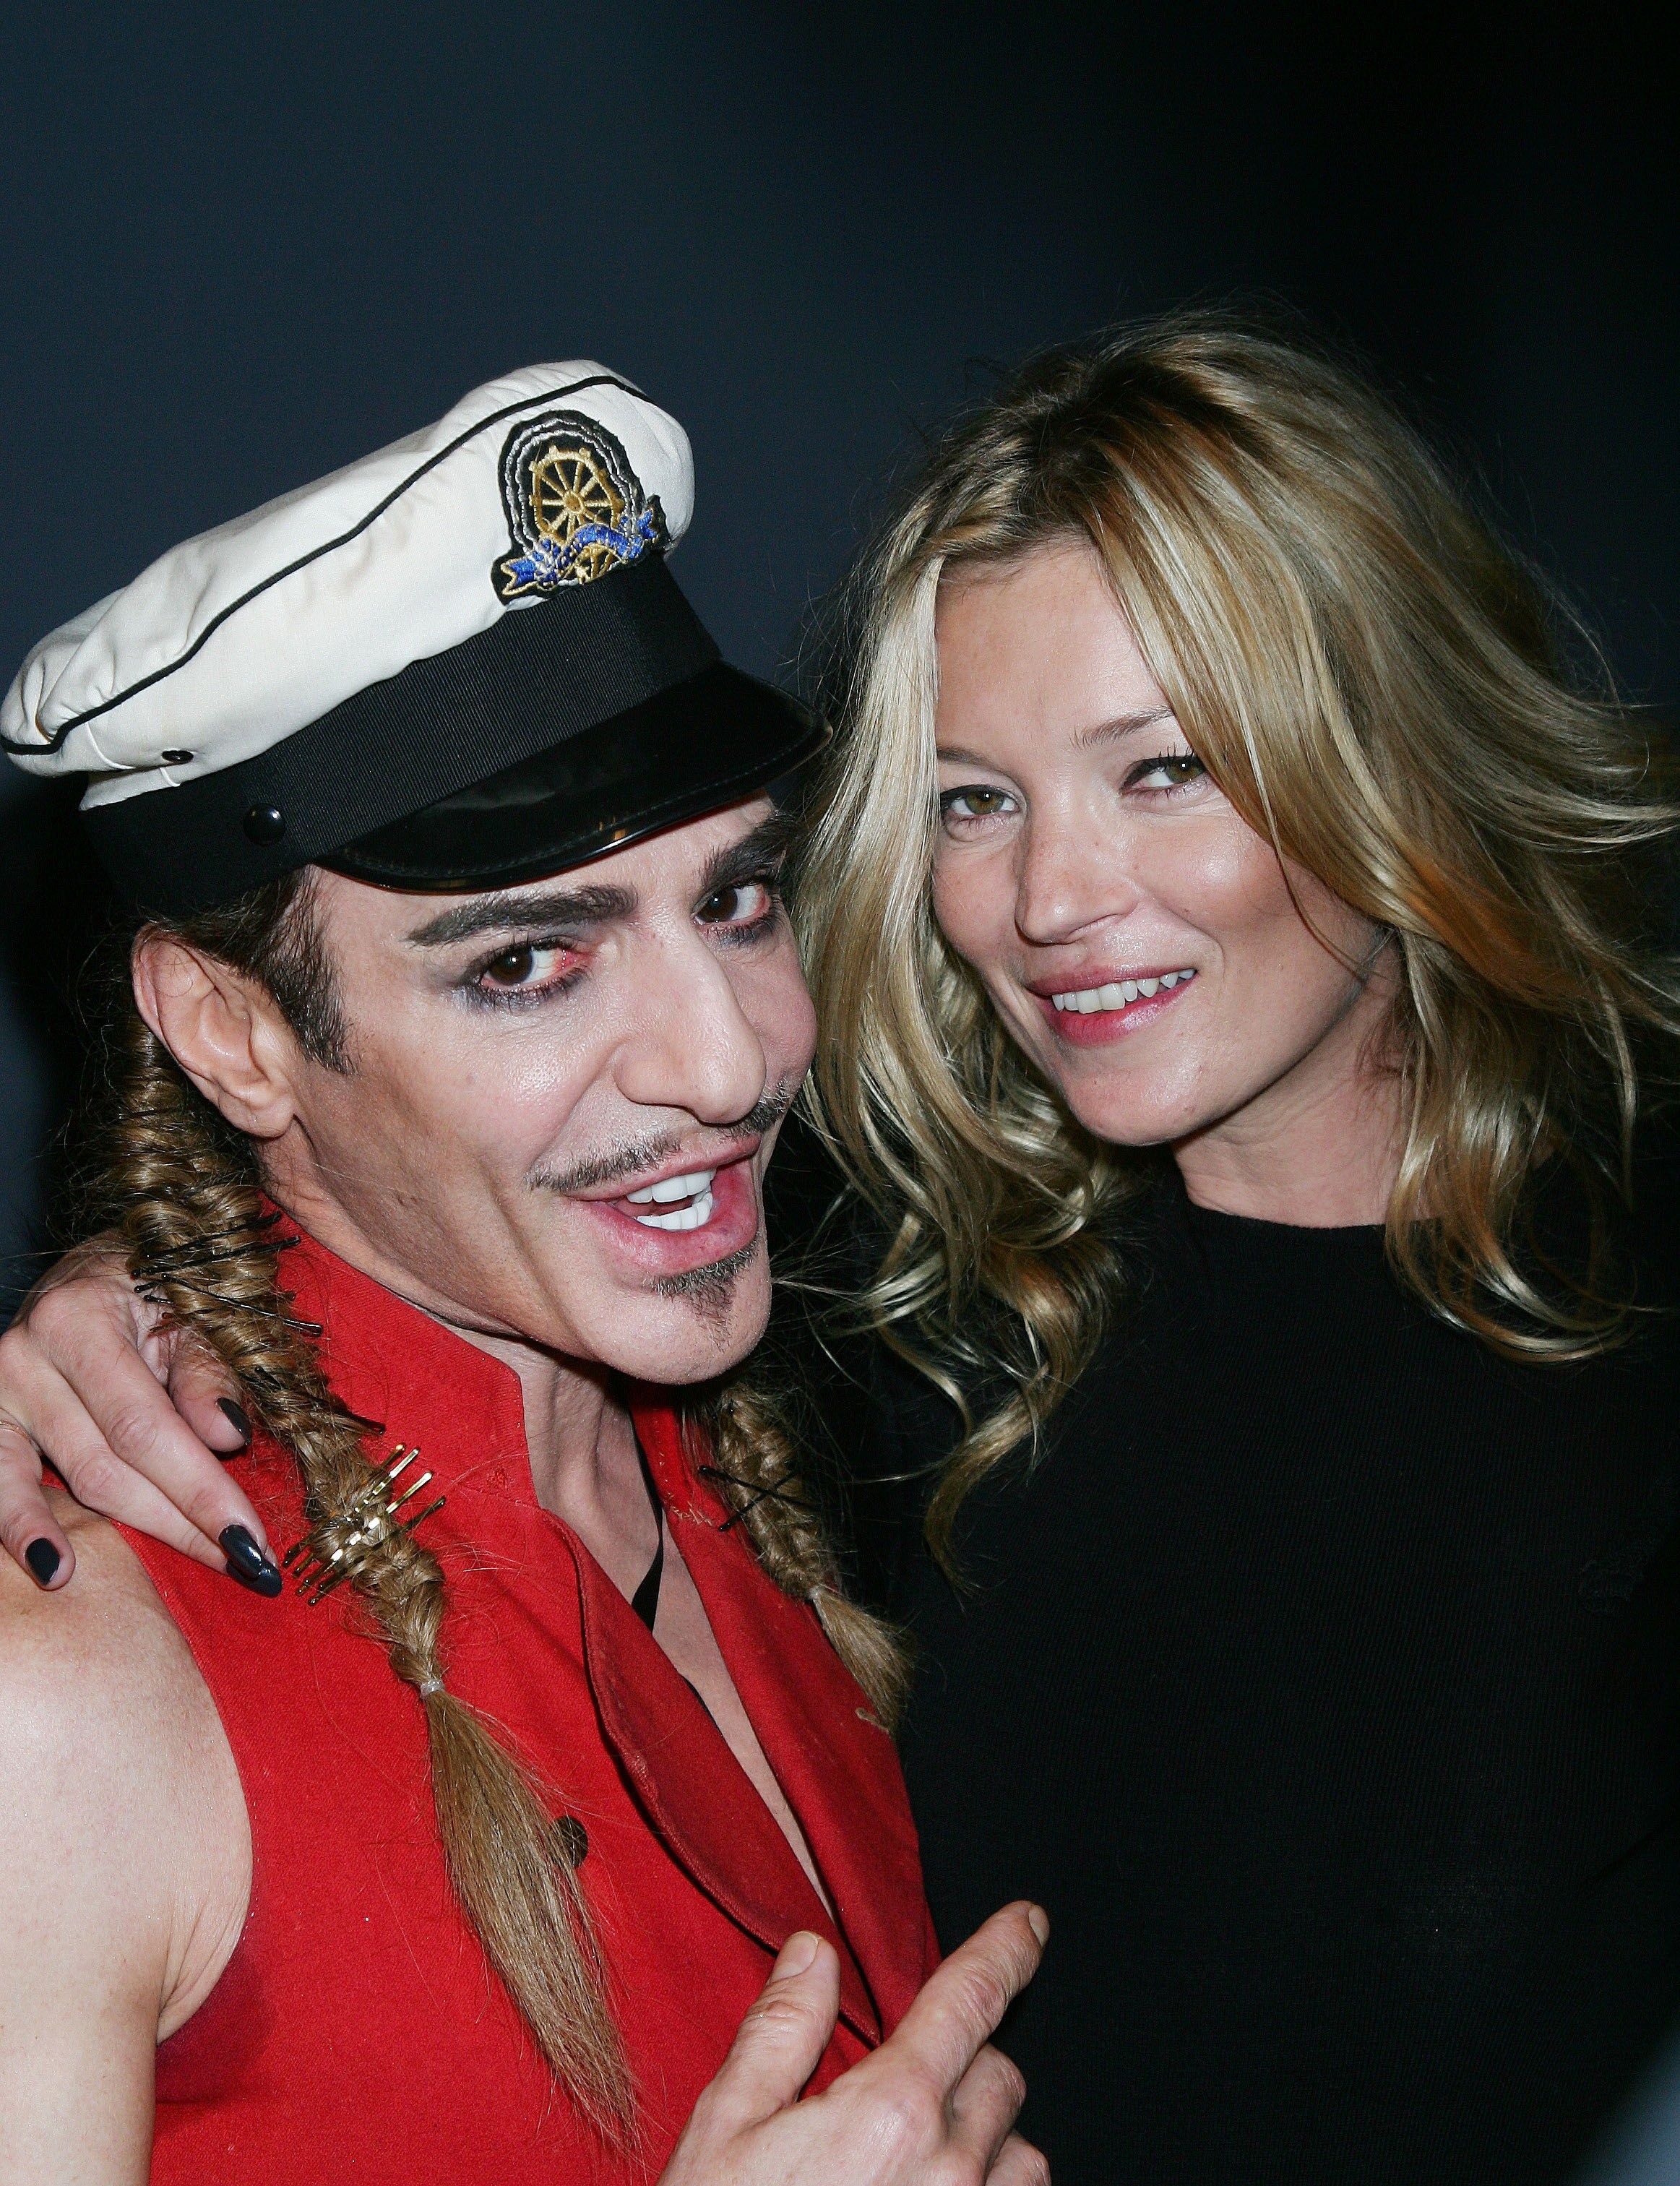 John Galliano and Kate Moss photographed together at Dior Ready to Wear Spring-Summer 2010 Fashion Show in Paris on Oct. 1, 2010.